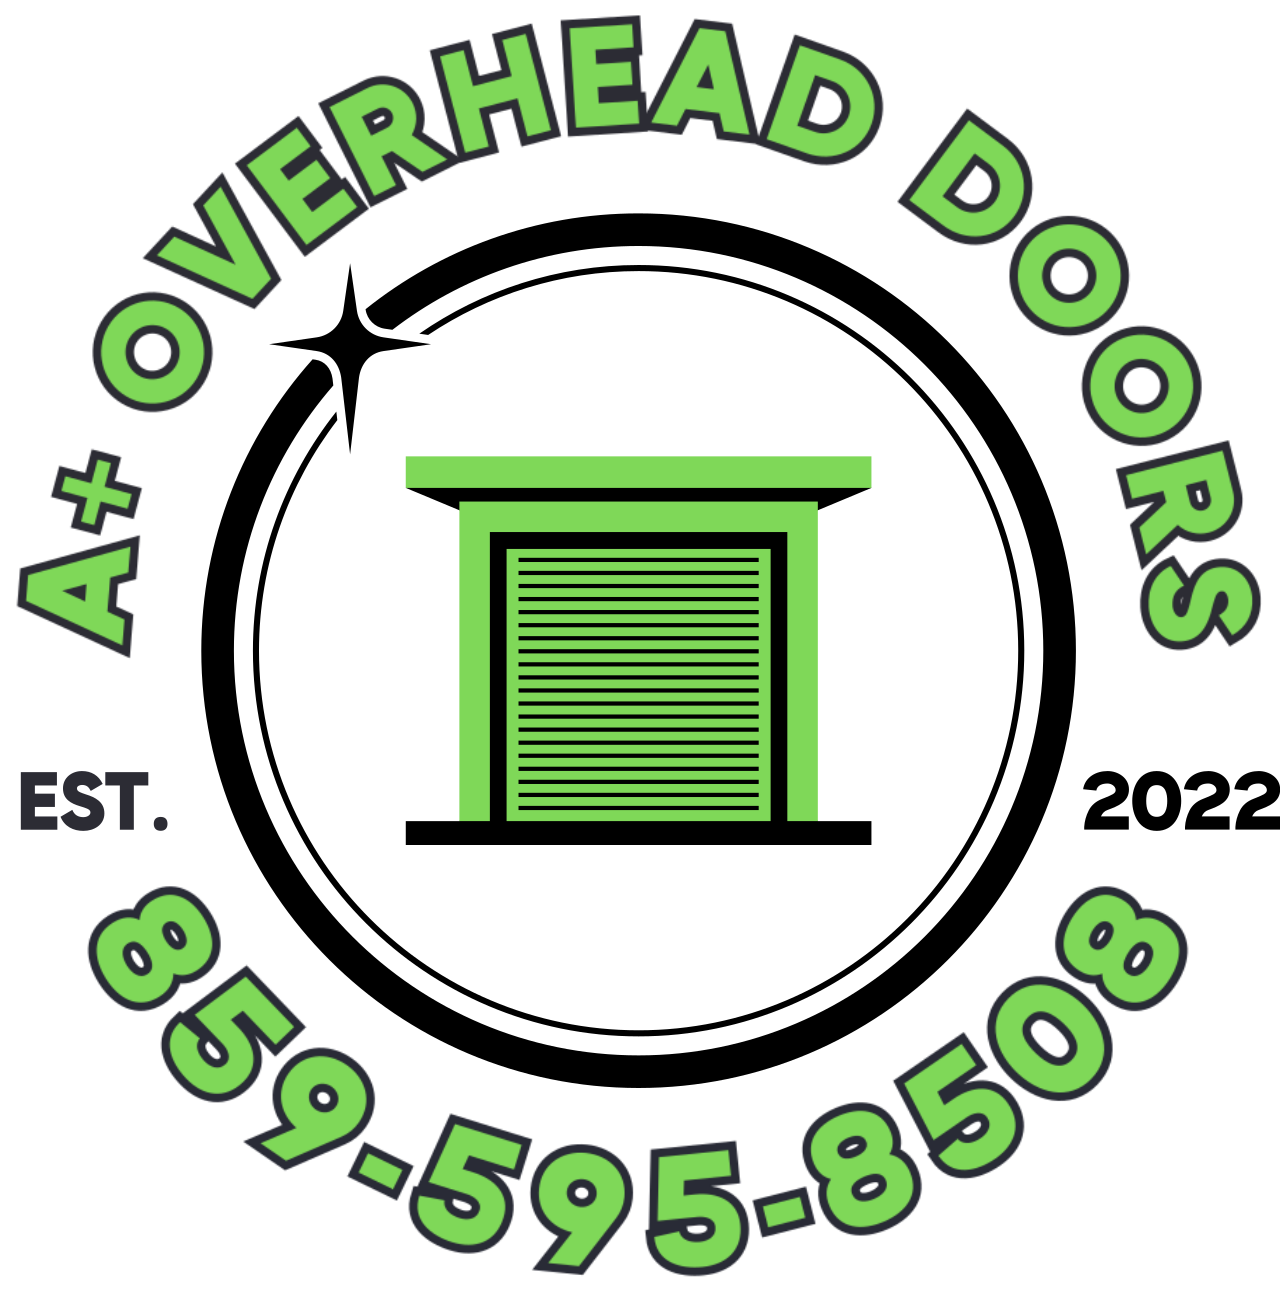 A+ Overhead Doors's web page